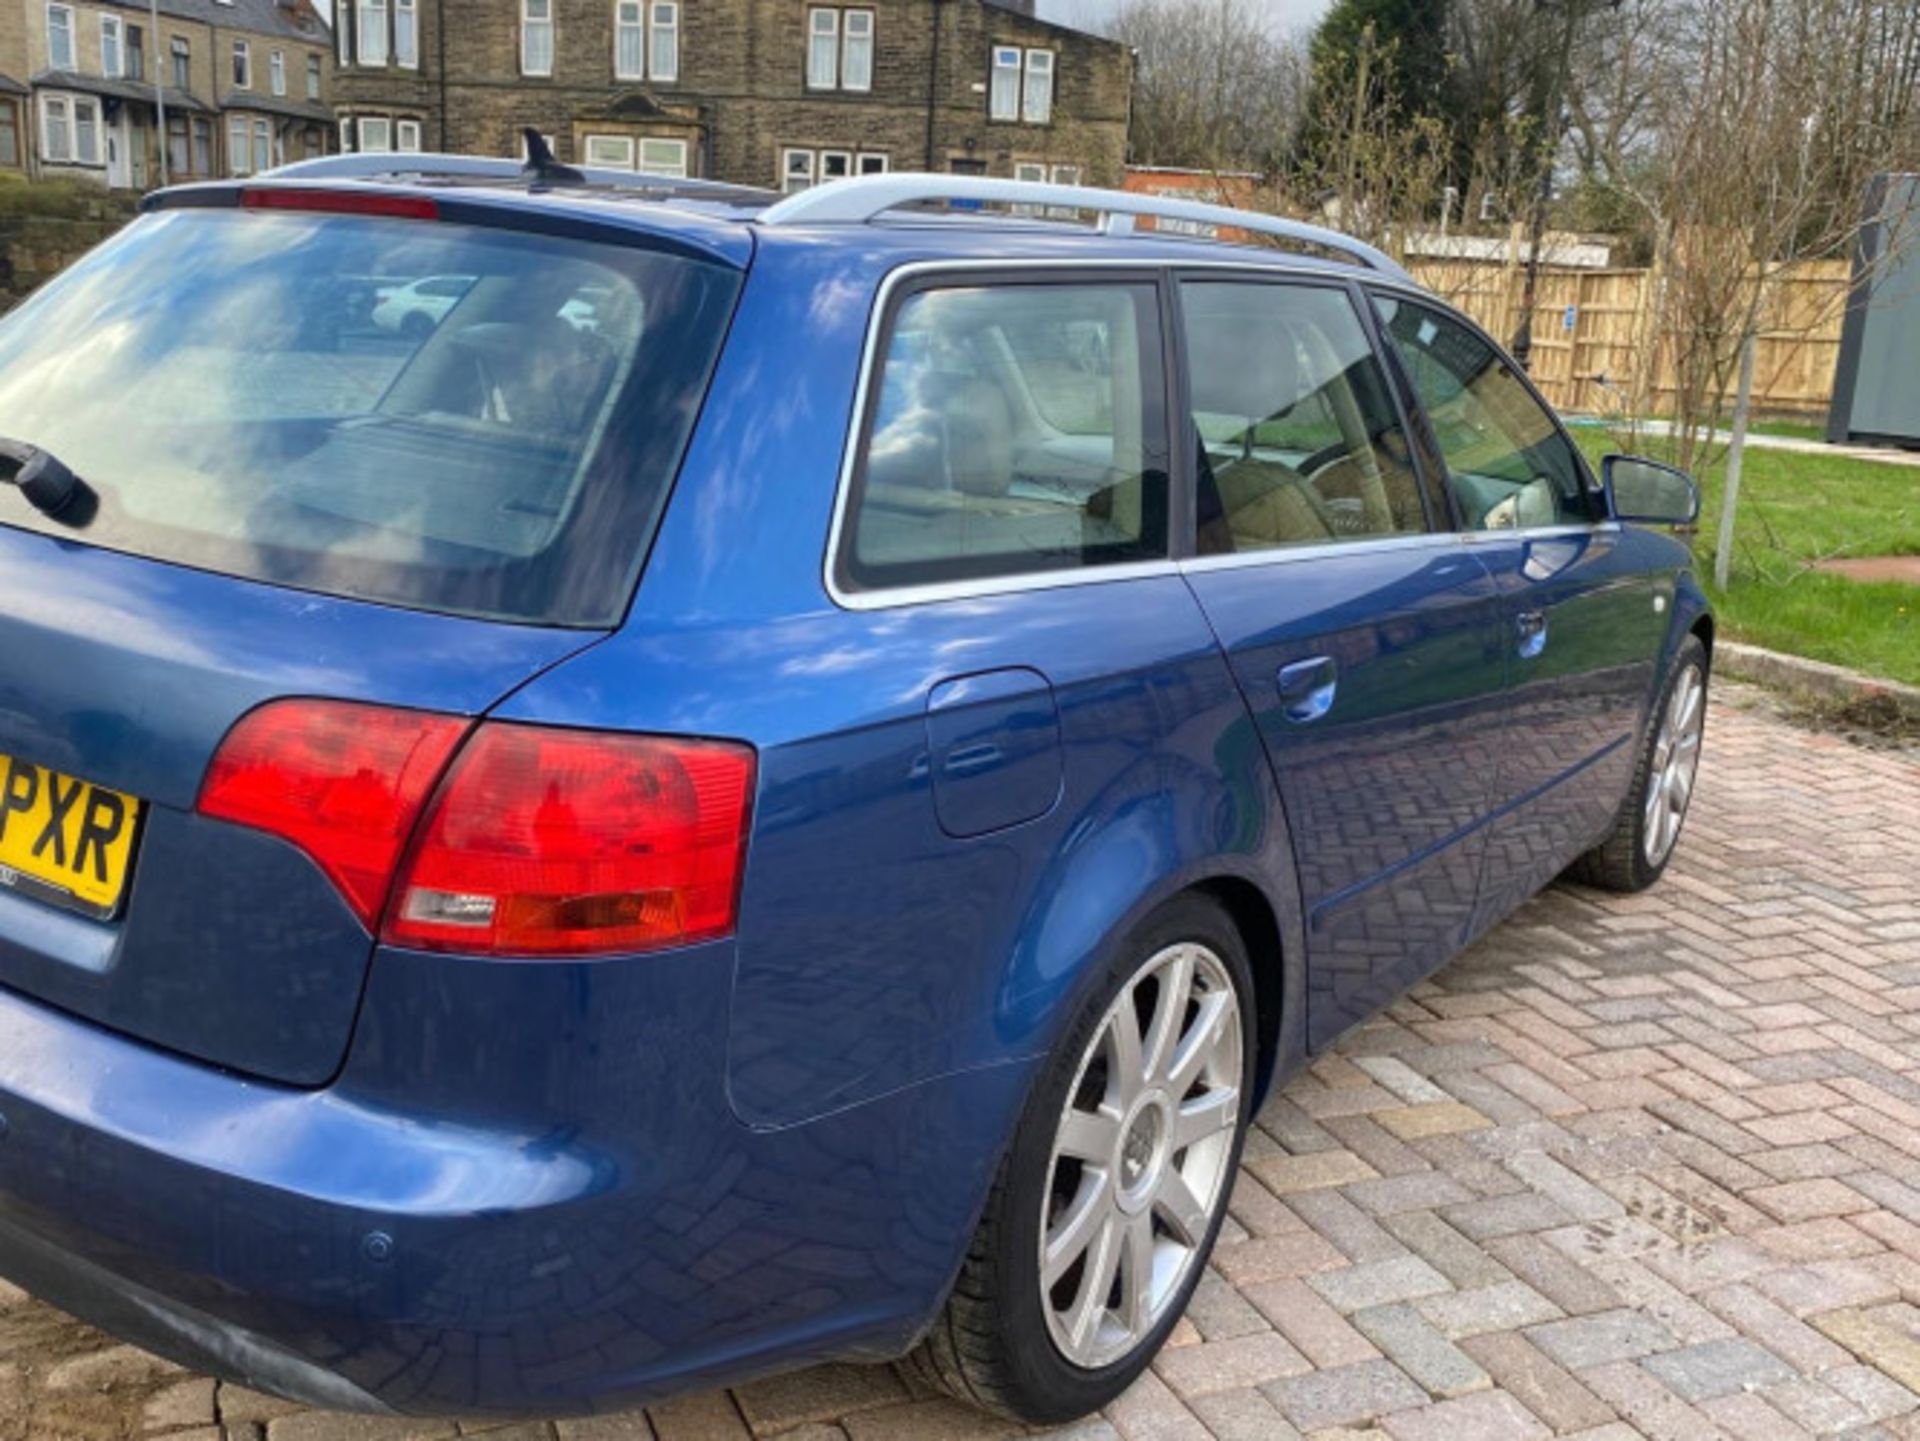 AUDI A4 AVANT 1.9 TDI SE 5DR ESTATE - RARE AND RELIABLE LUXURY WAGON >>--NO VAT ON HAMMER--<< - Image 89 of 97